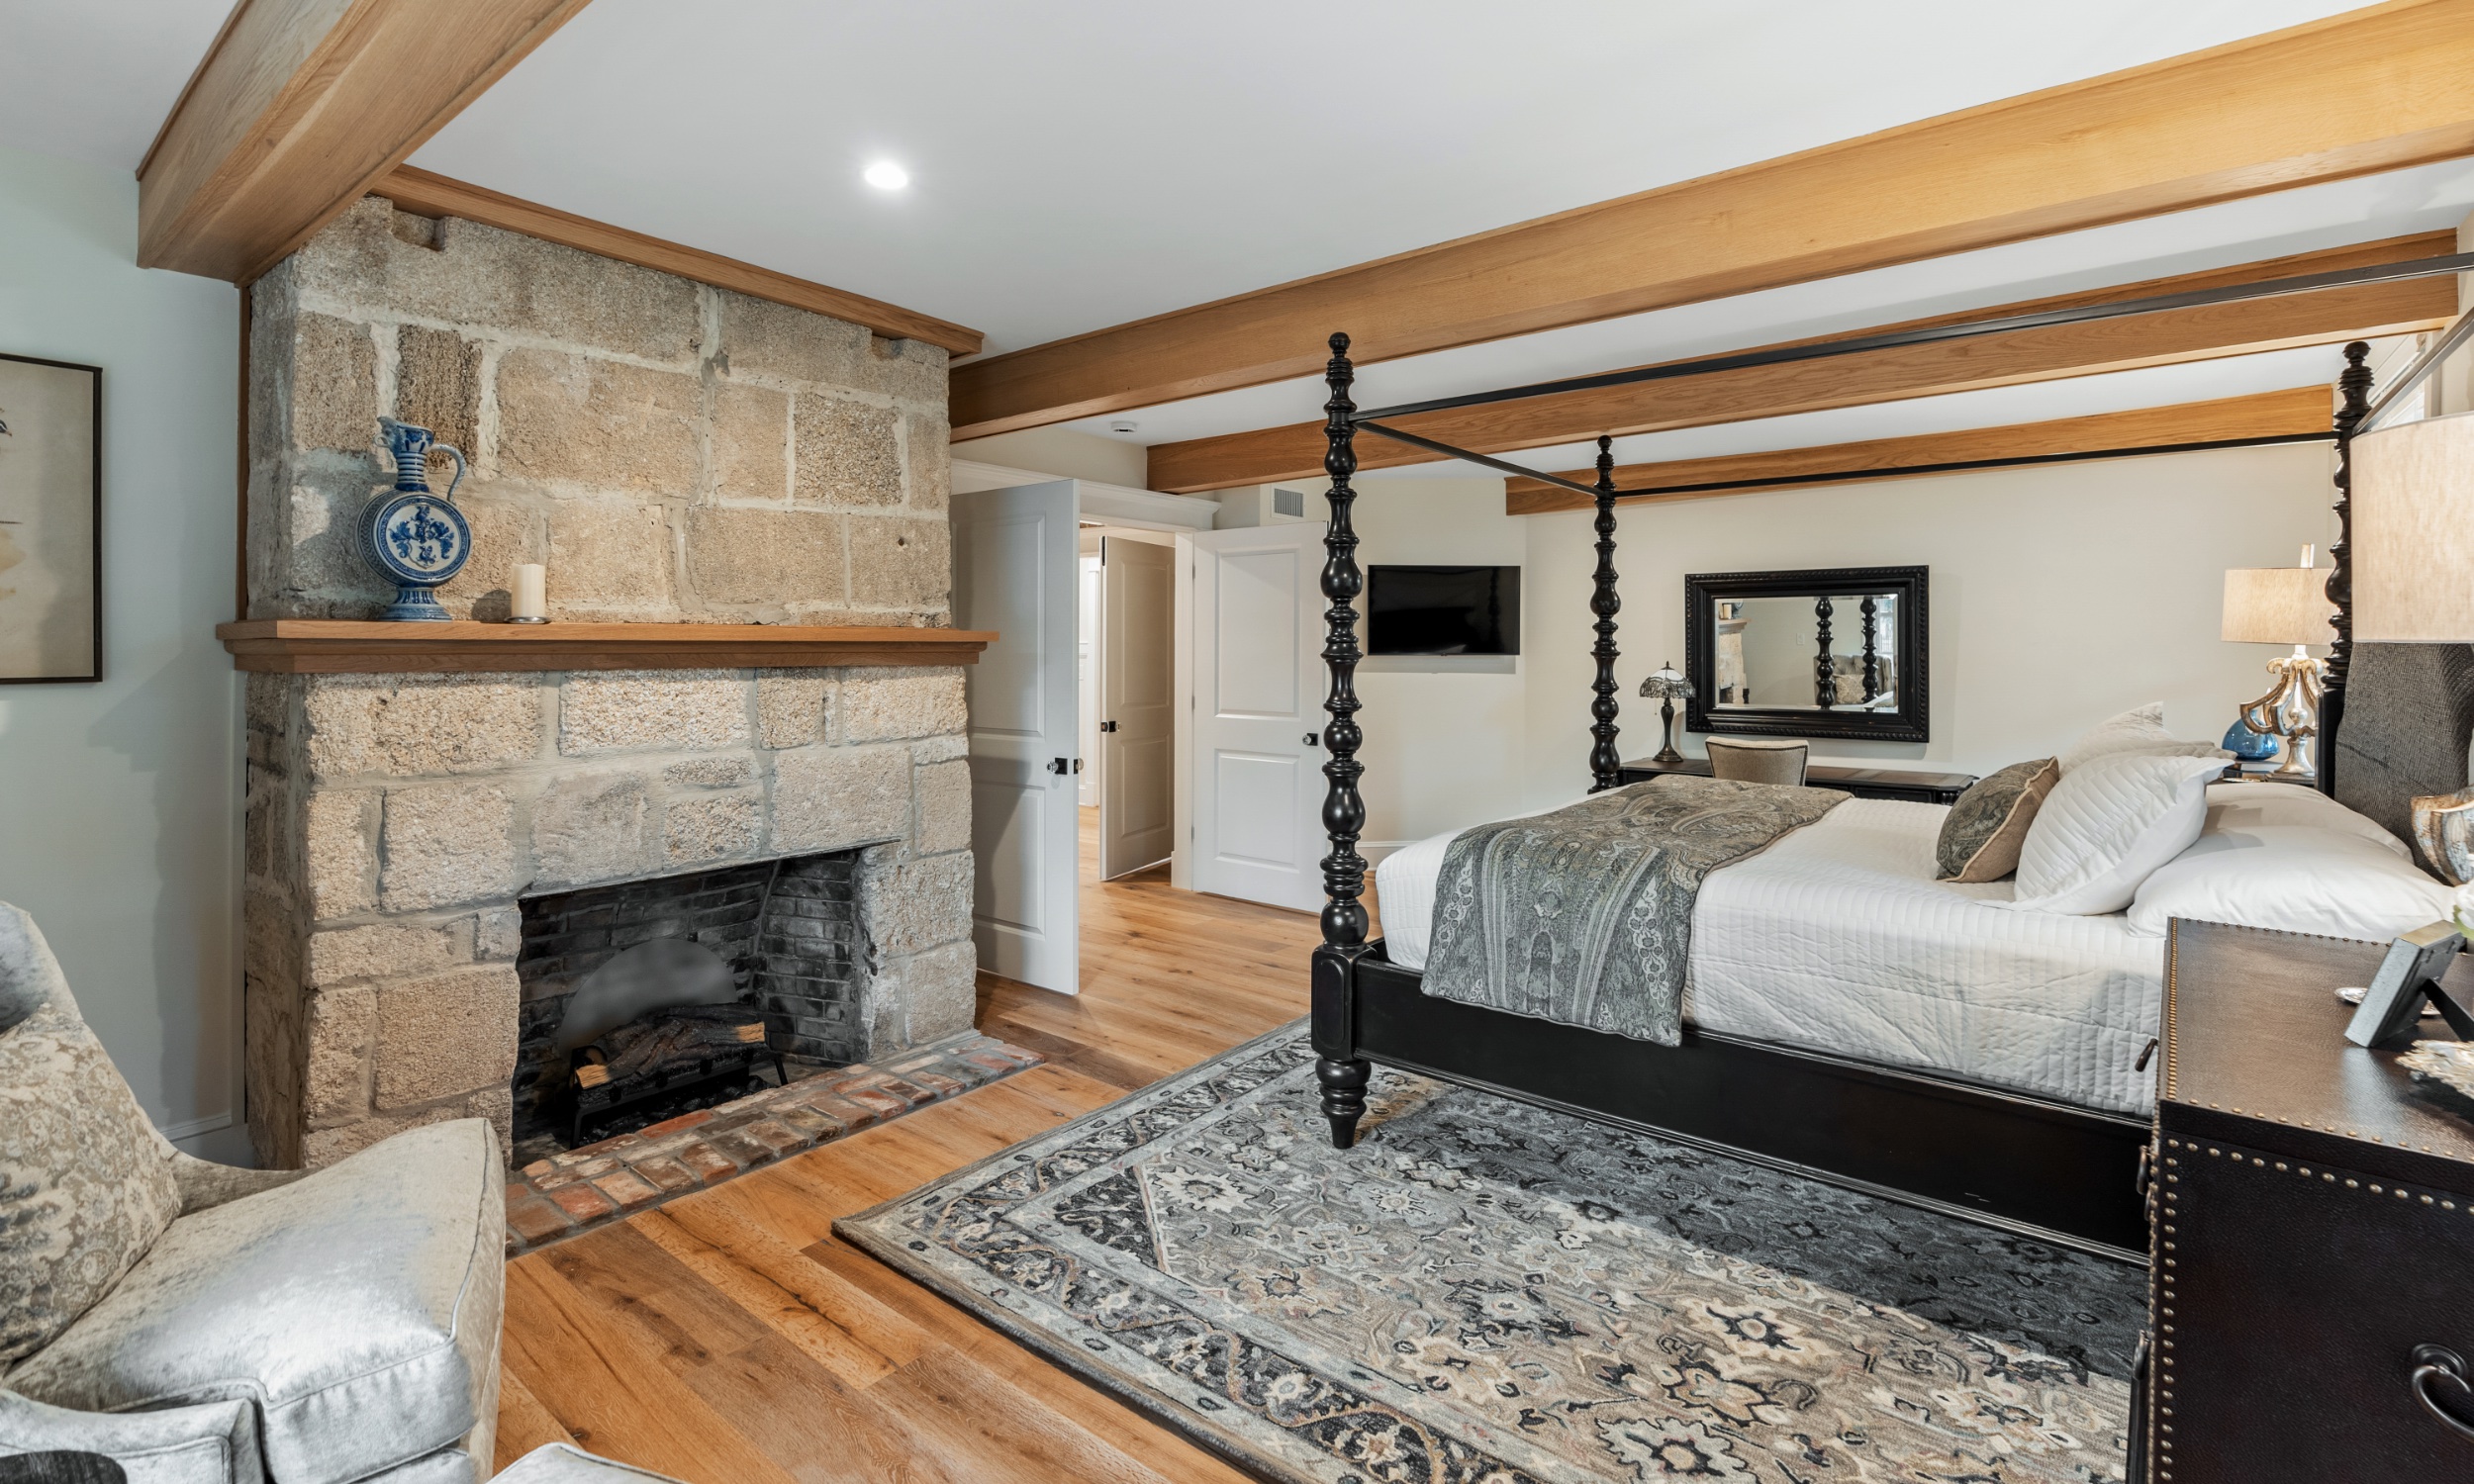 This large bedroom has a fireplace, large wood beams, and four-poster bed